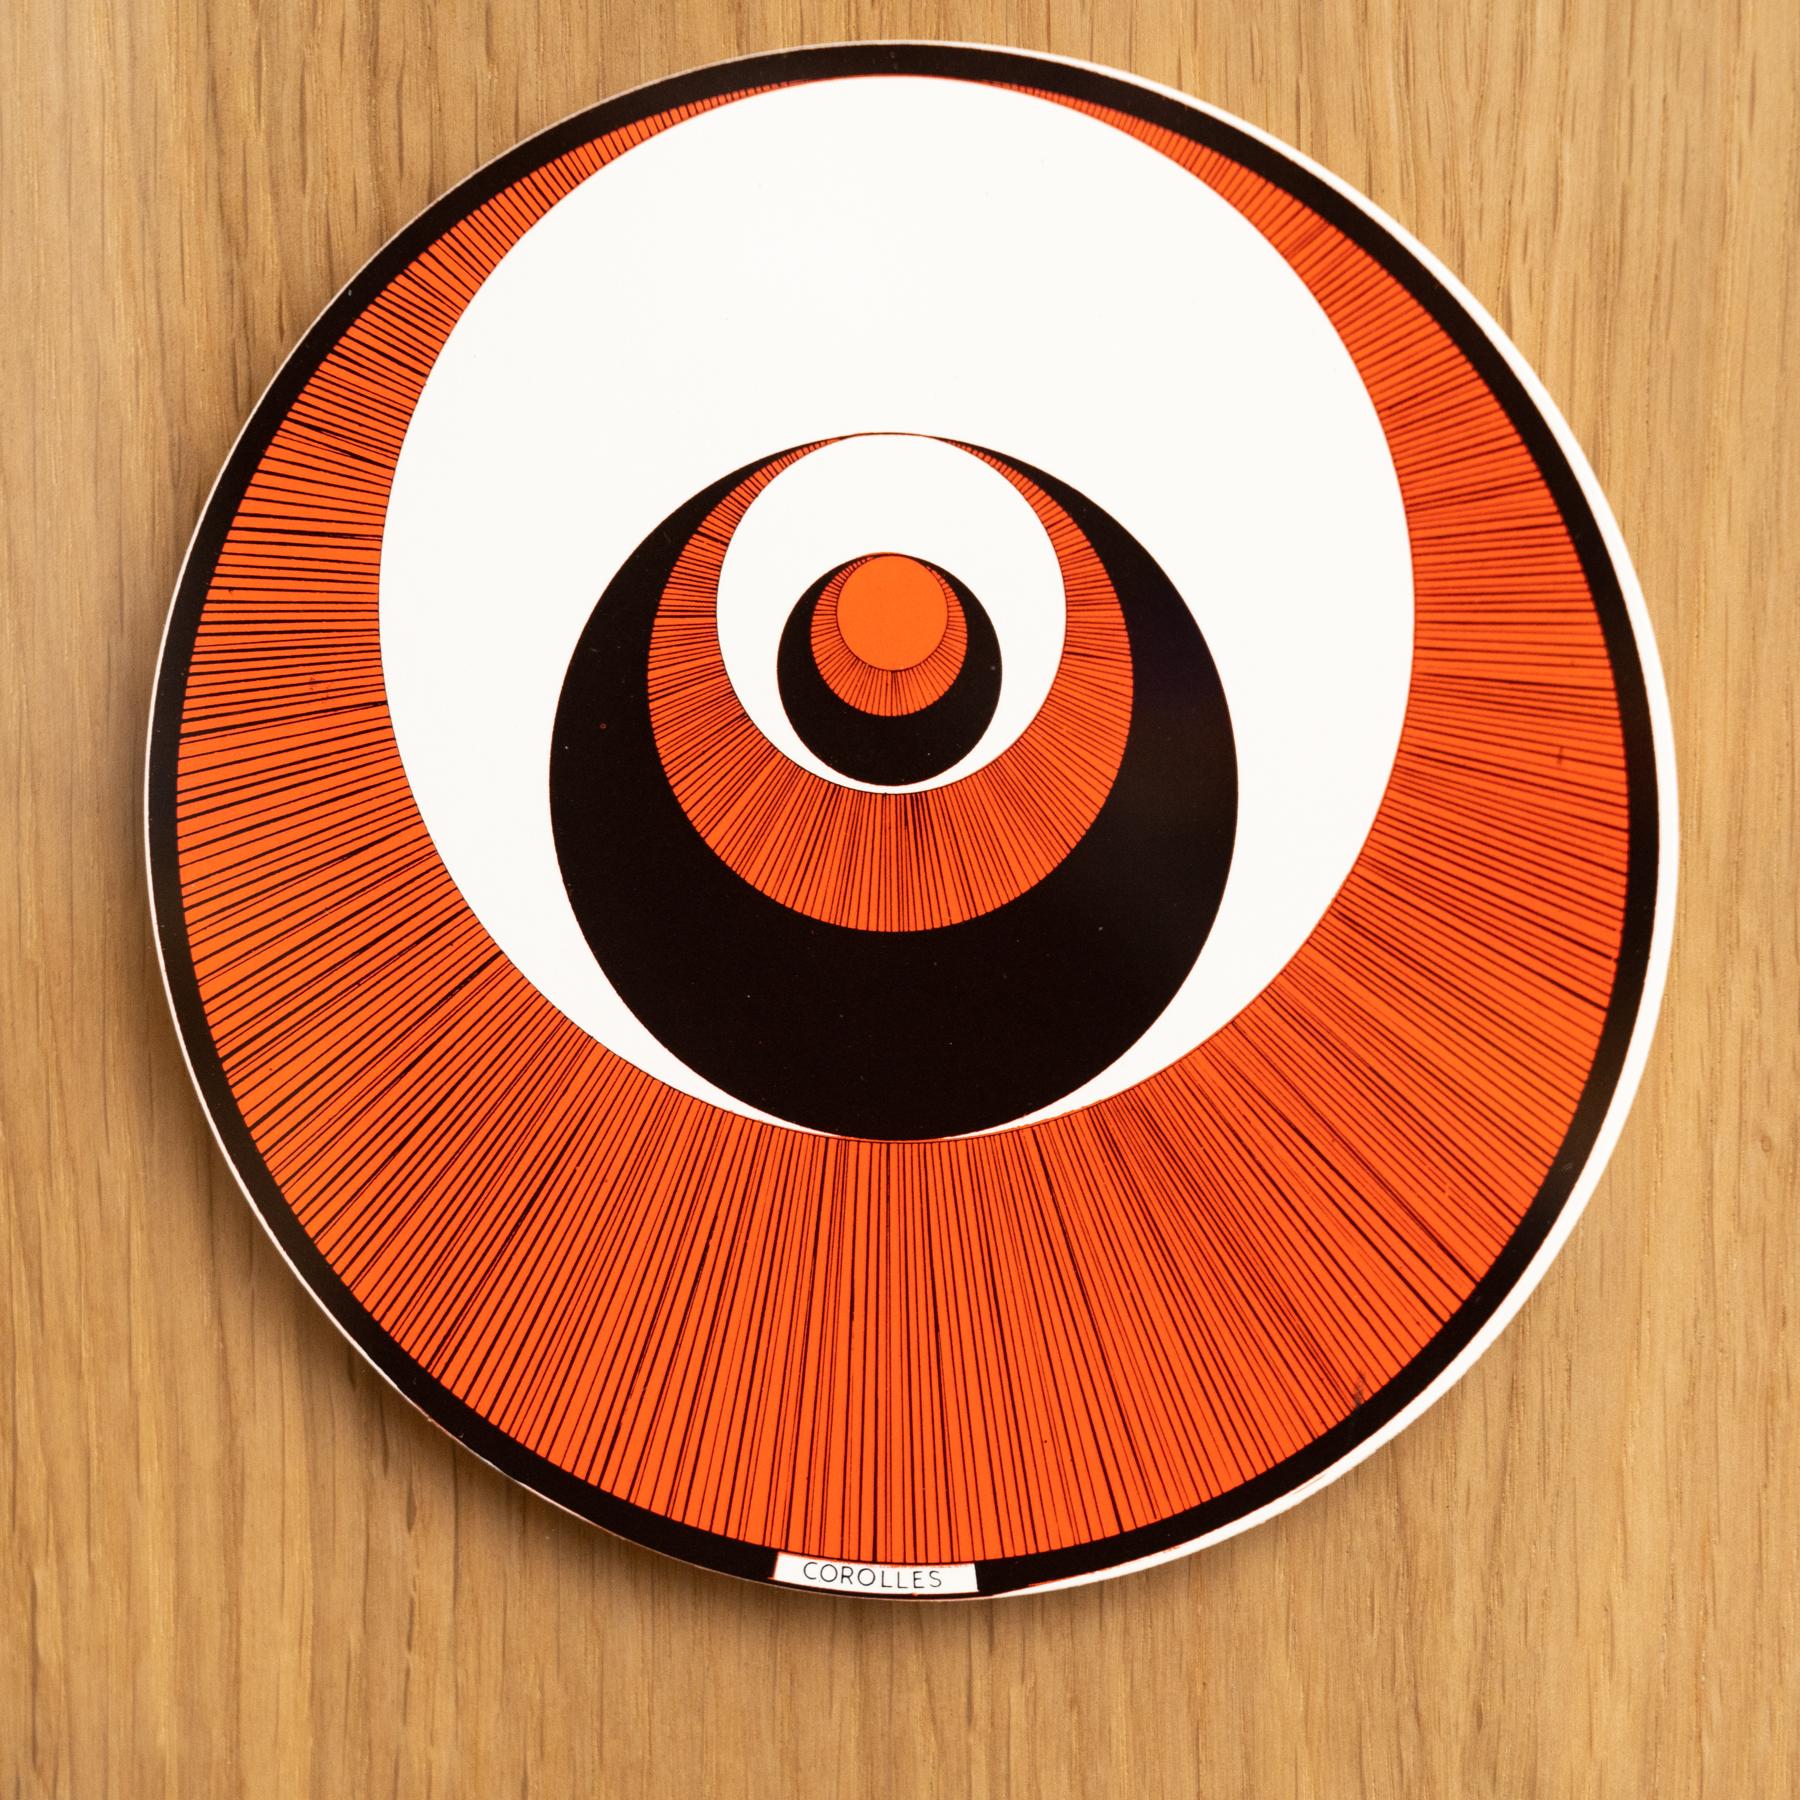 Marcel Duchamp Red Black and White Corolles Rotorelief by Konig Series 133, 1987 For Sale 1